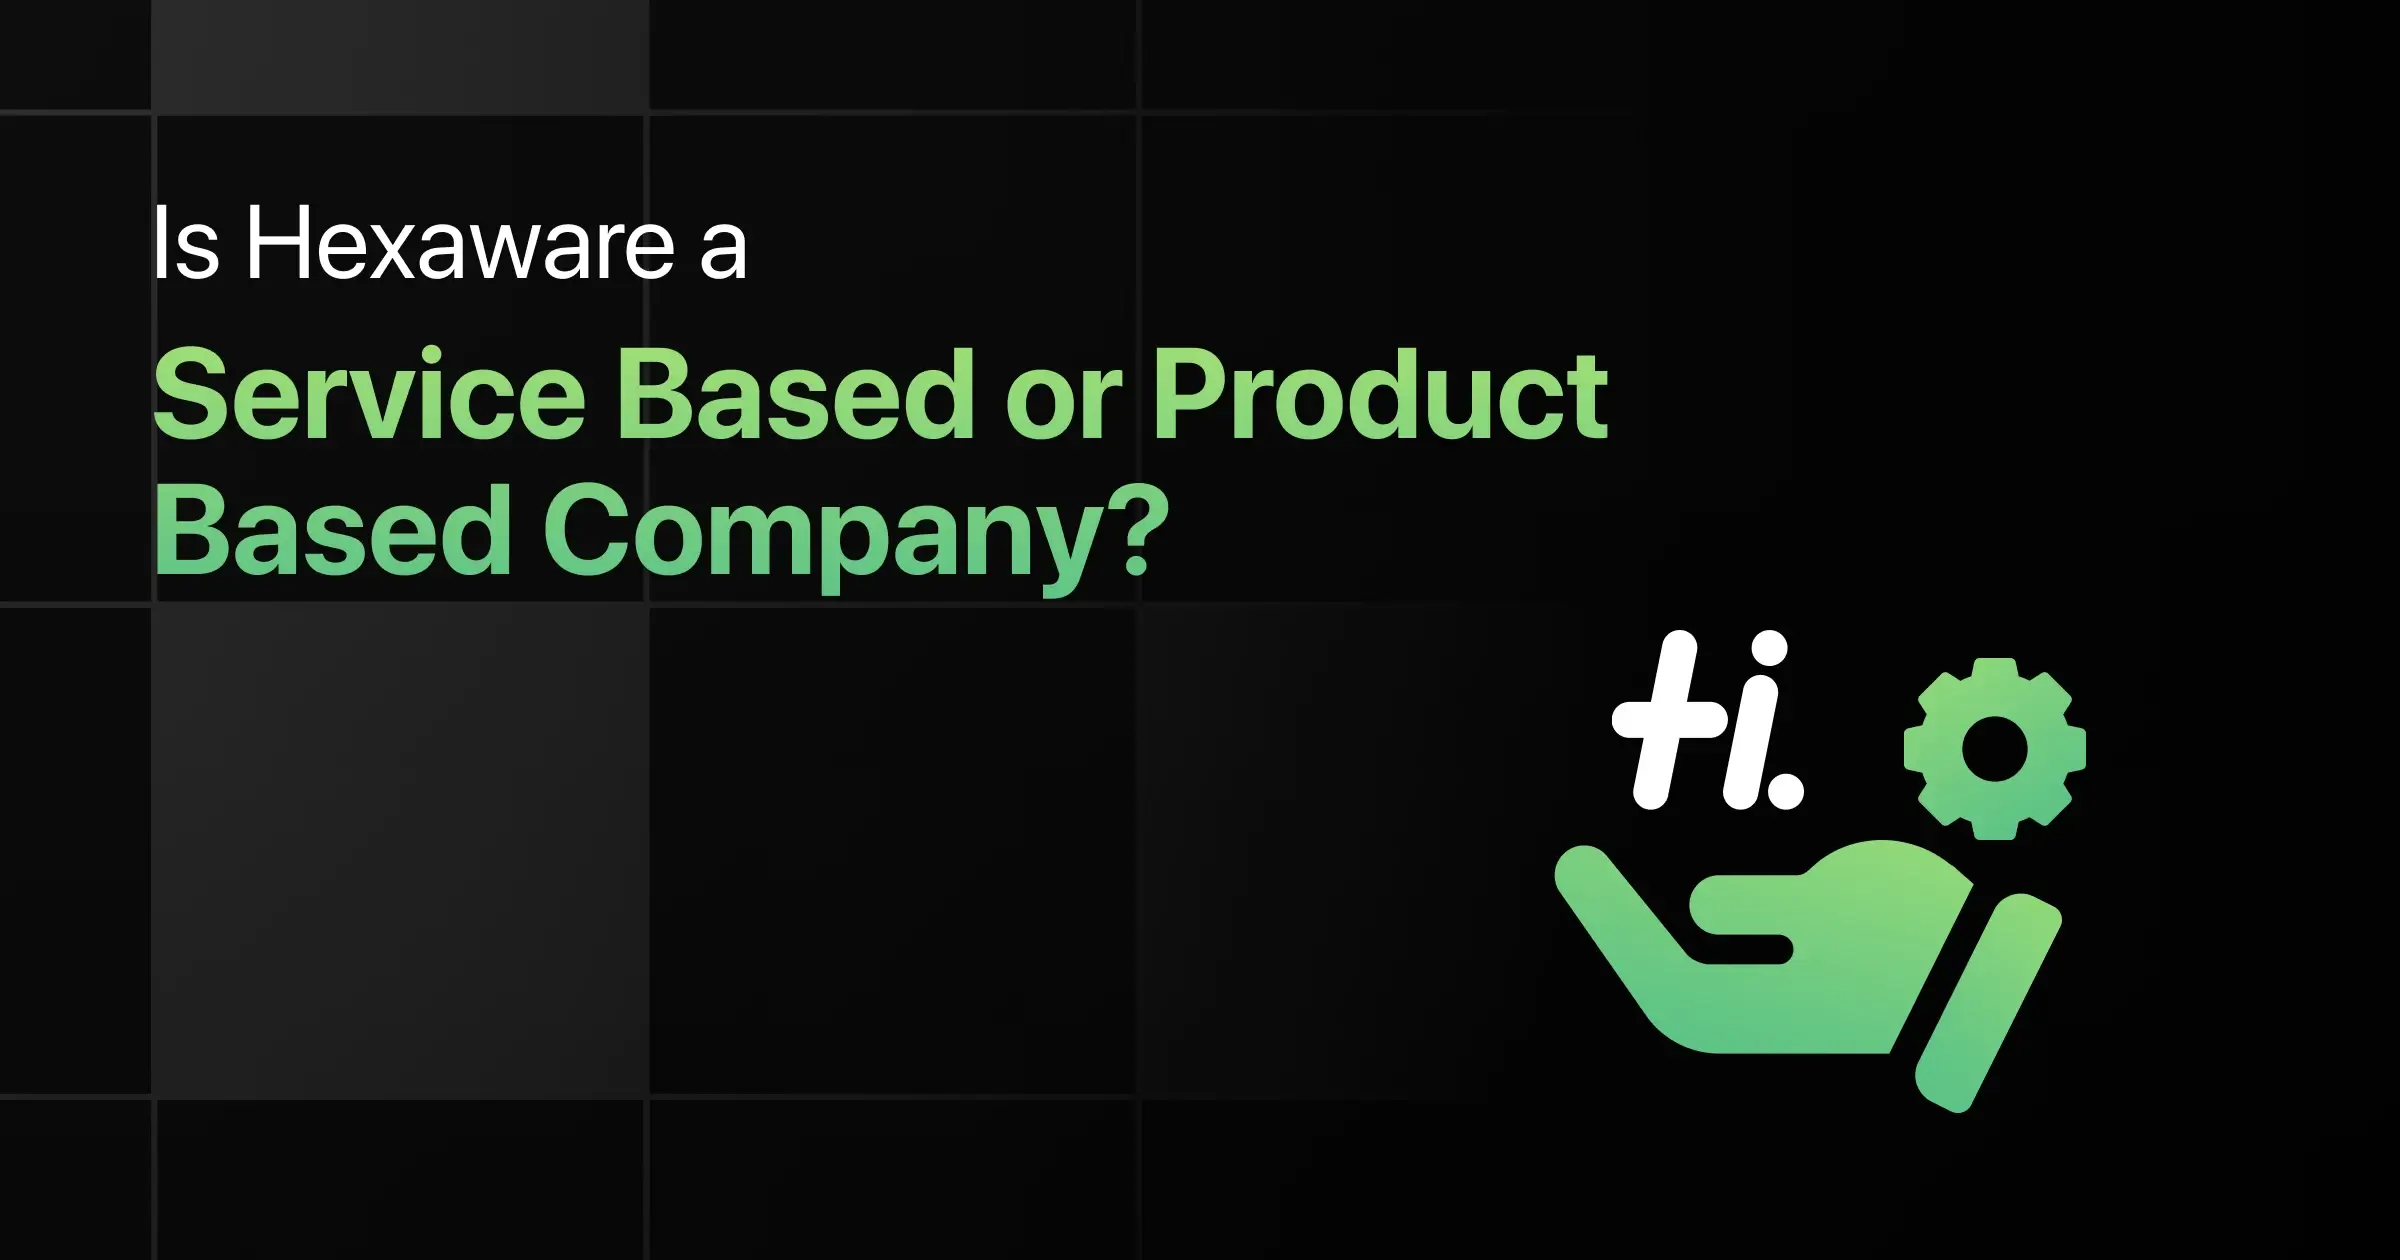 Is Hexaware a Service Based or Product Based Company?